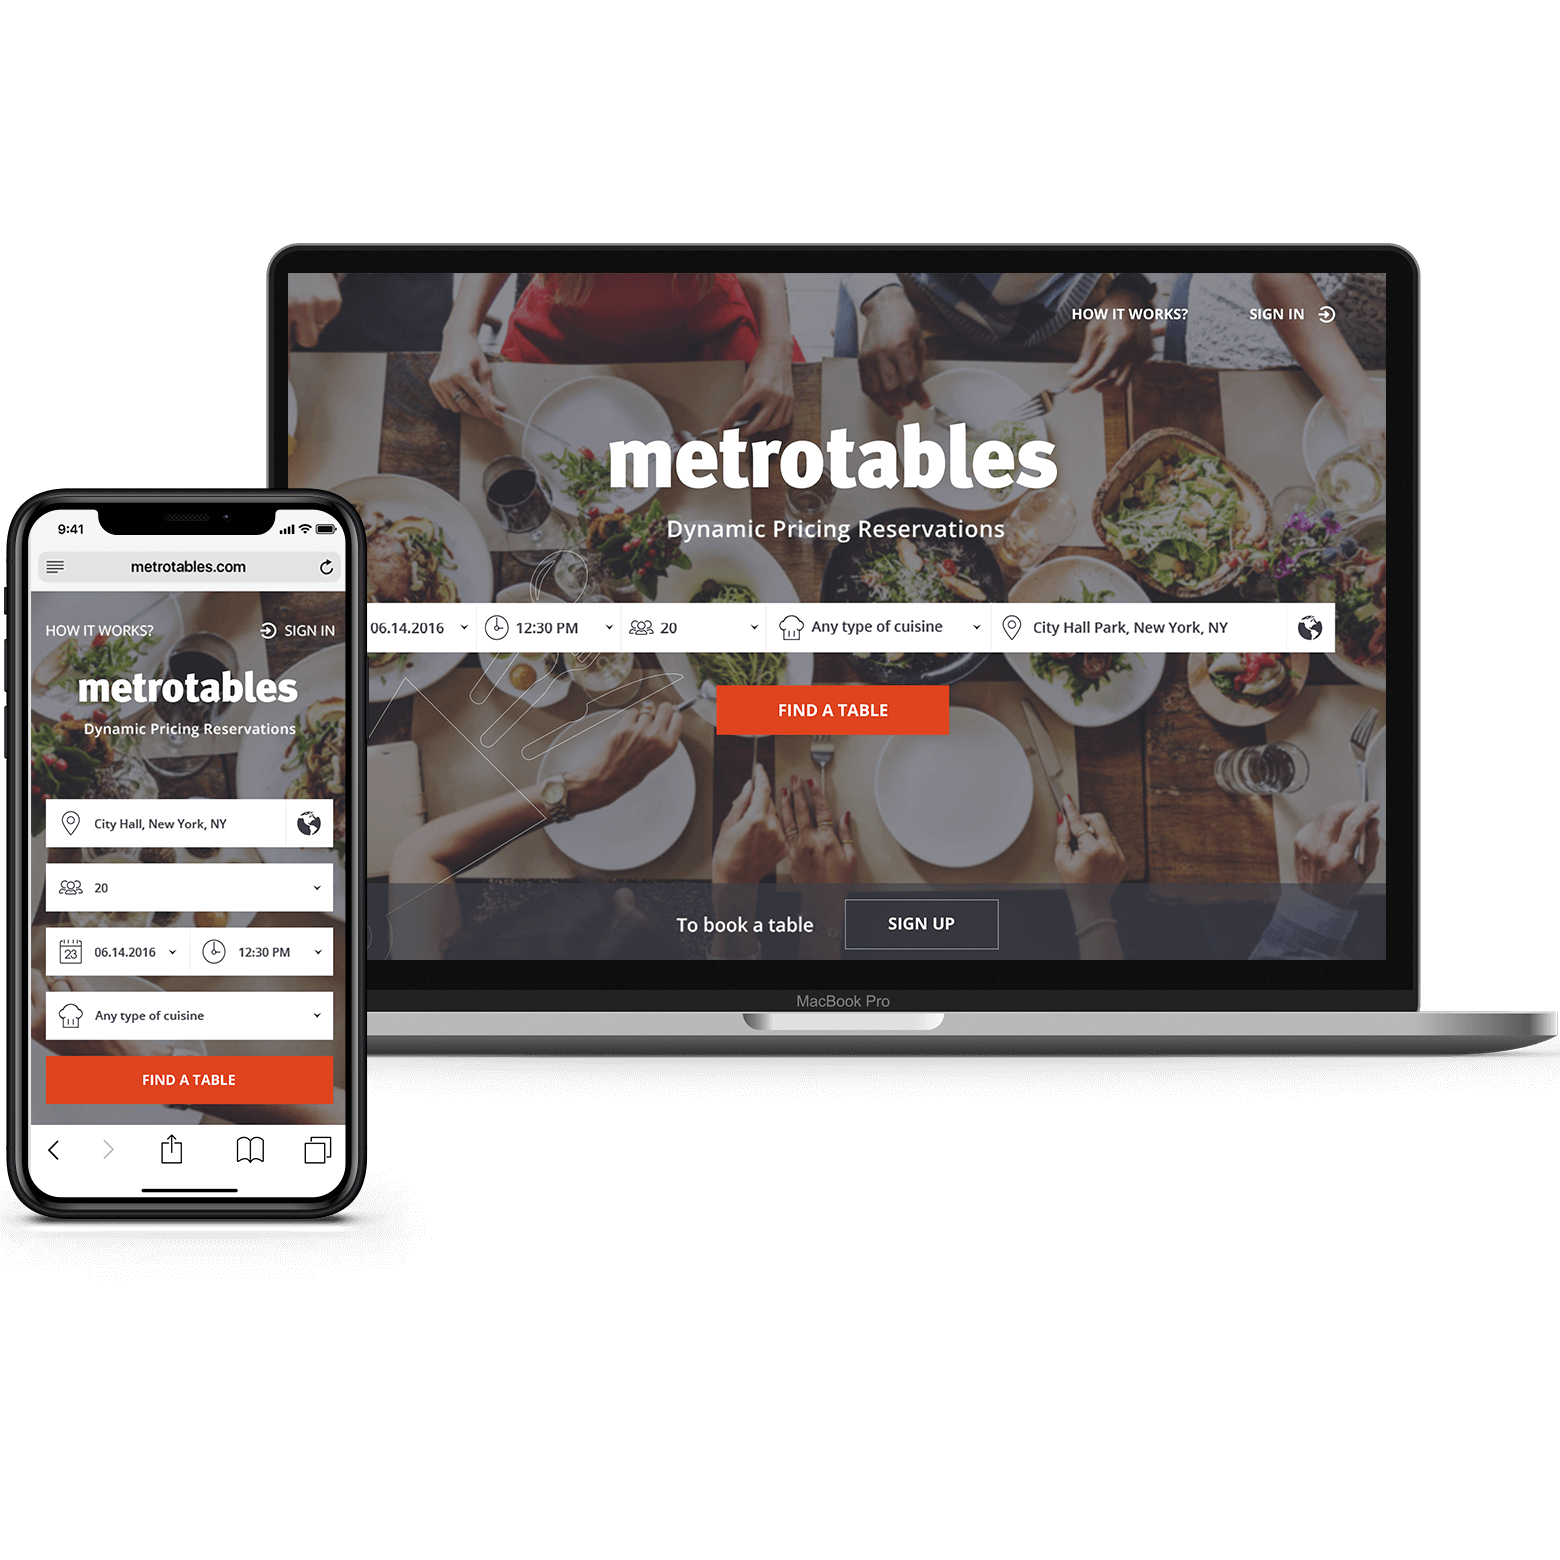 An online platform for dynamic pricing services and reservations at restaurants